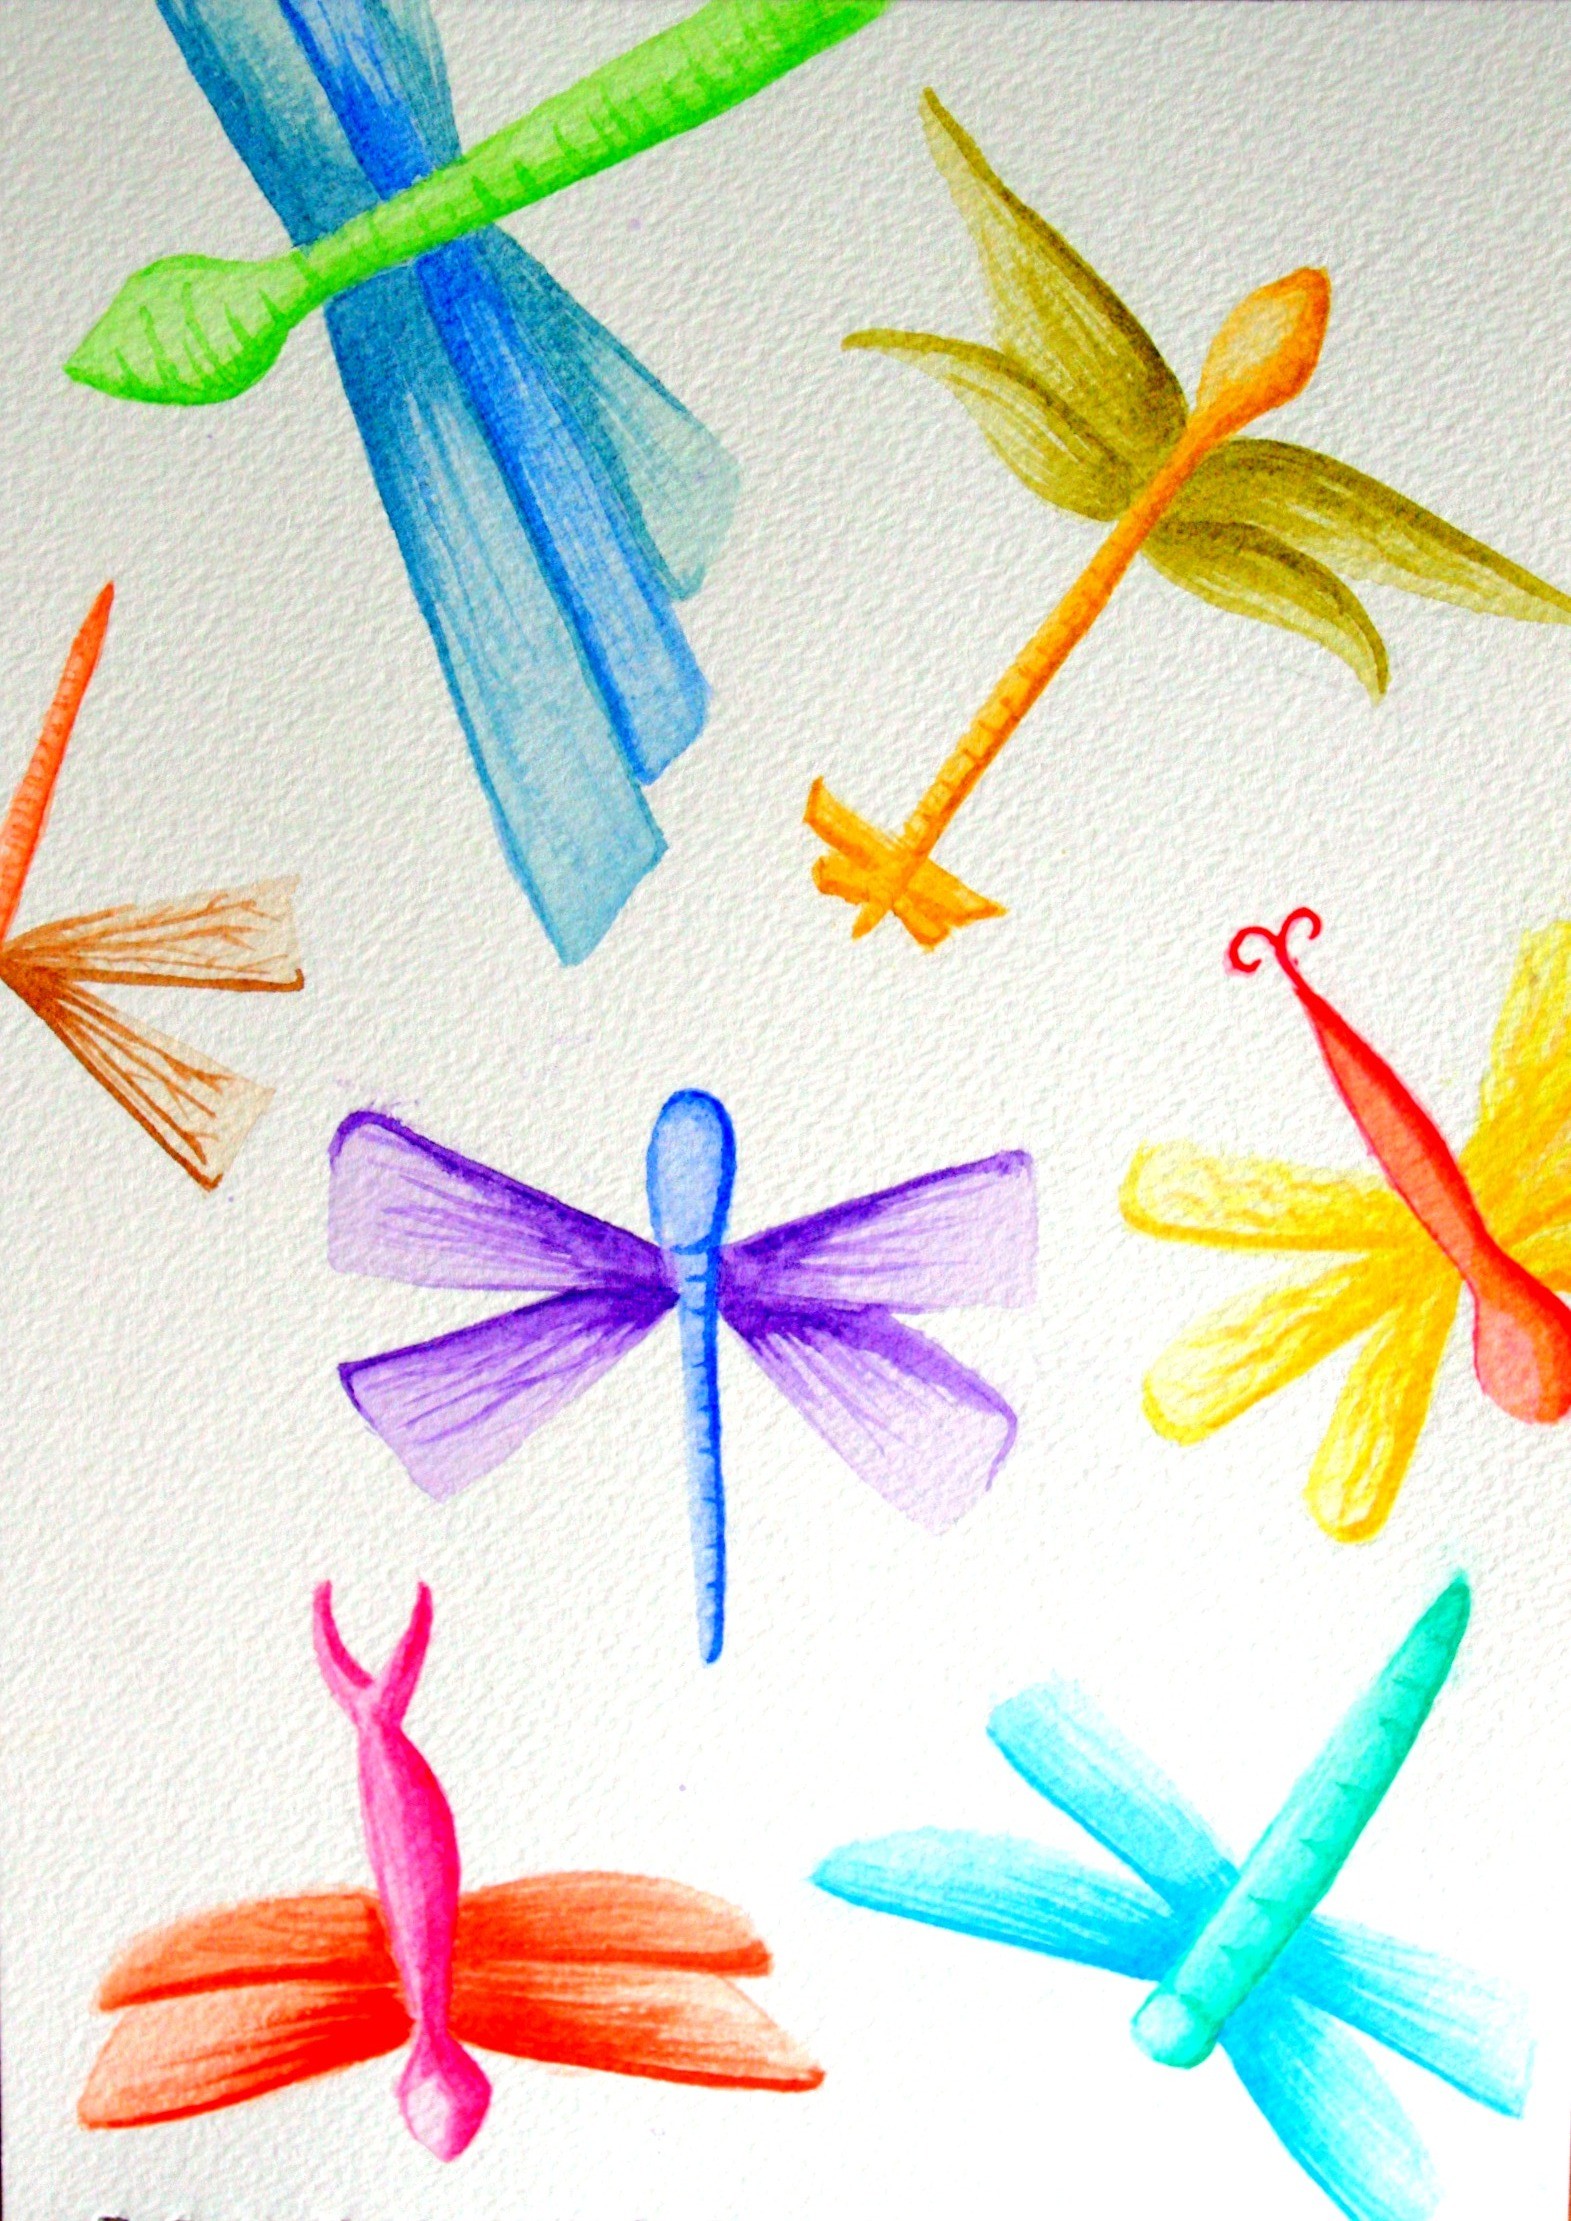 1571x2221 Dragonfly Wallpaper by oxlunaxo Dragonfly Wallpaper by oxlunaxo